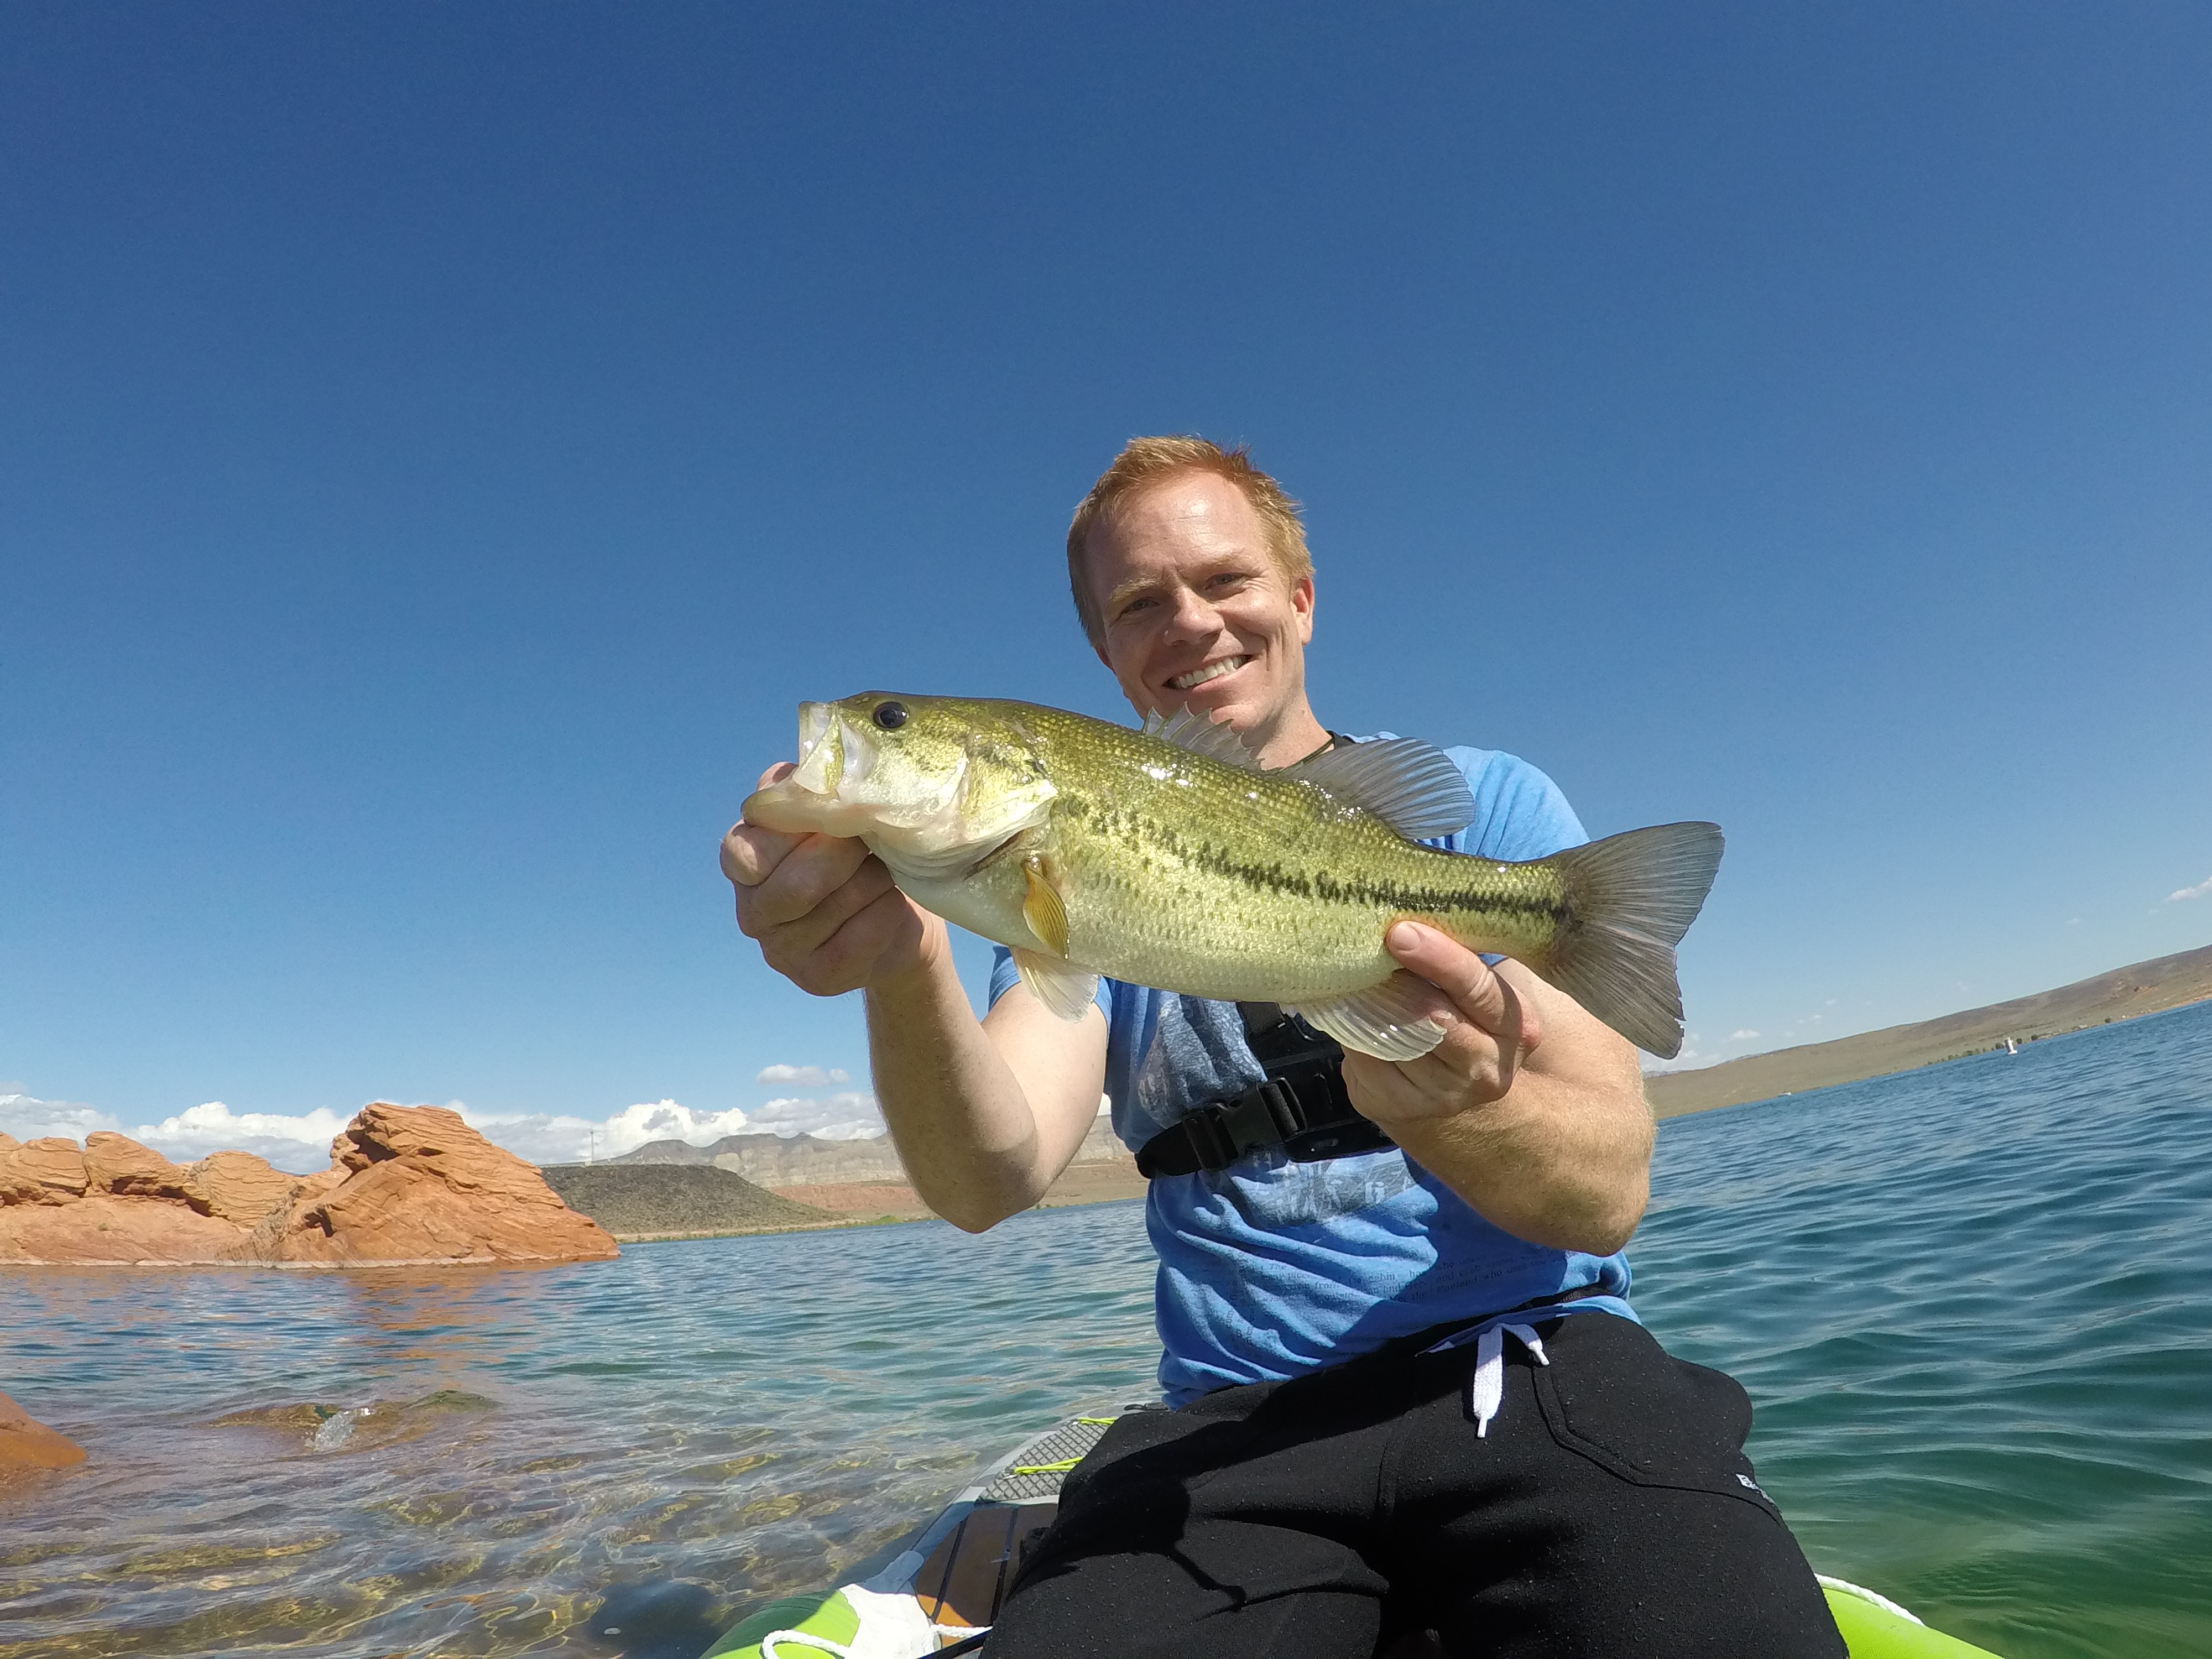 Catch Bass on Highly Fished Water - Fishing Report Sand Hollow